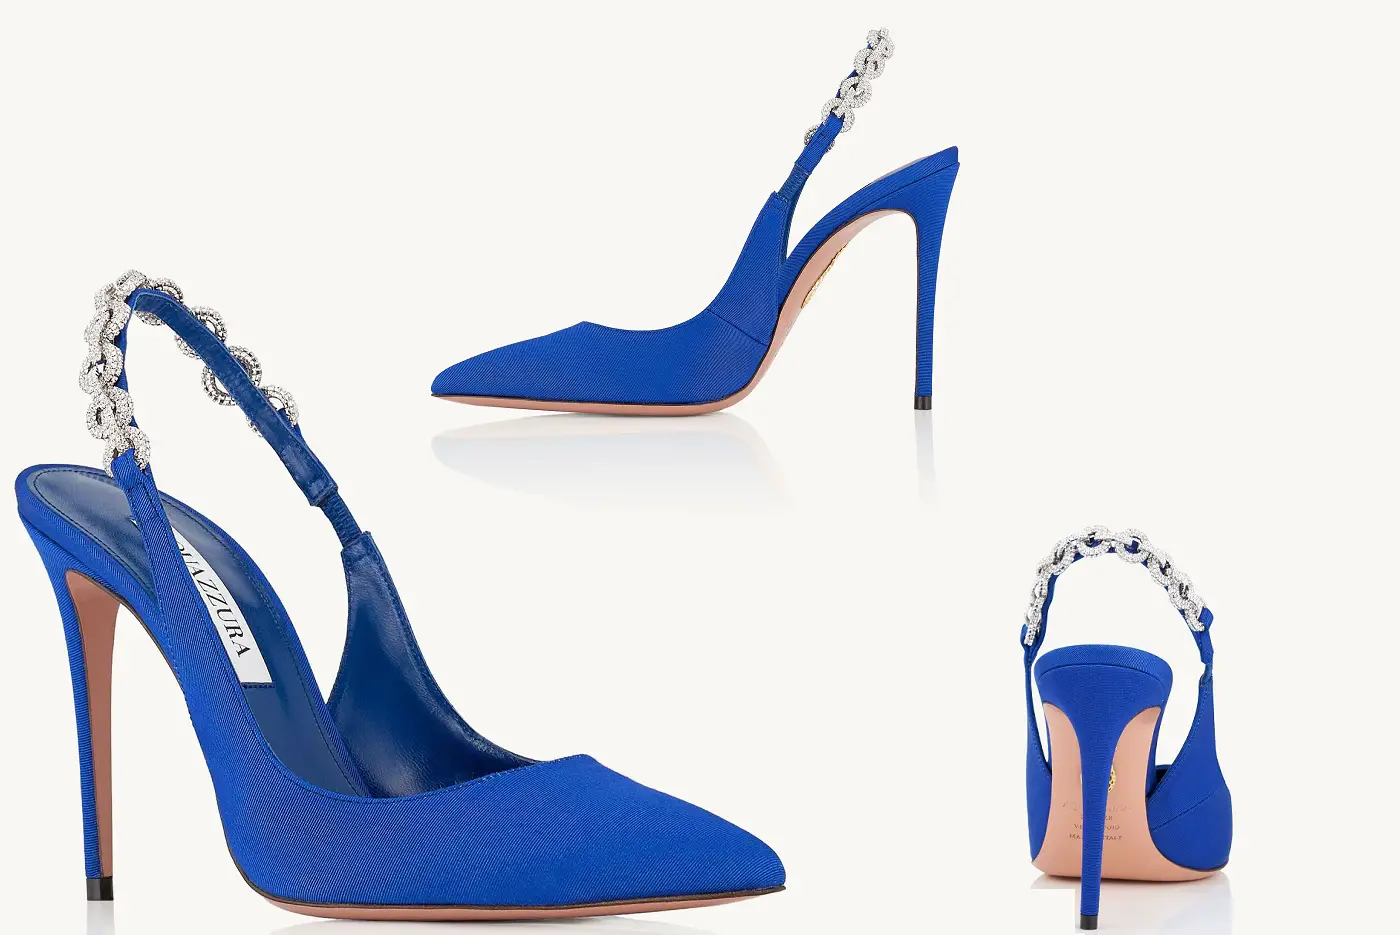 The Duchess of Cambridge wore Aquazzura Love Link Sling 105 pumps in June 2022 at the Order of Garter service